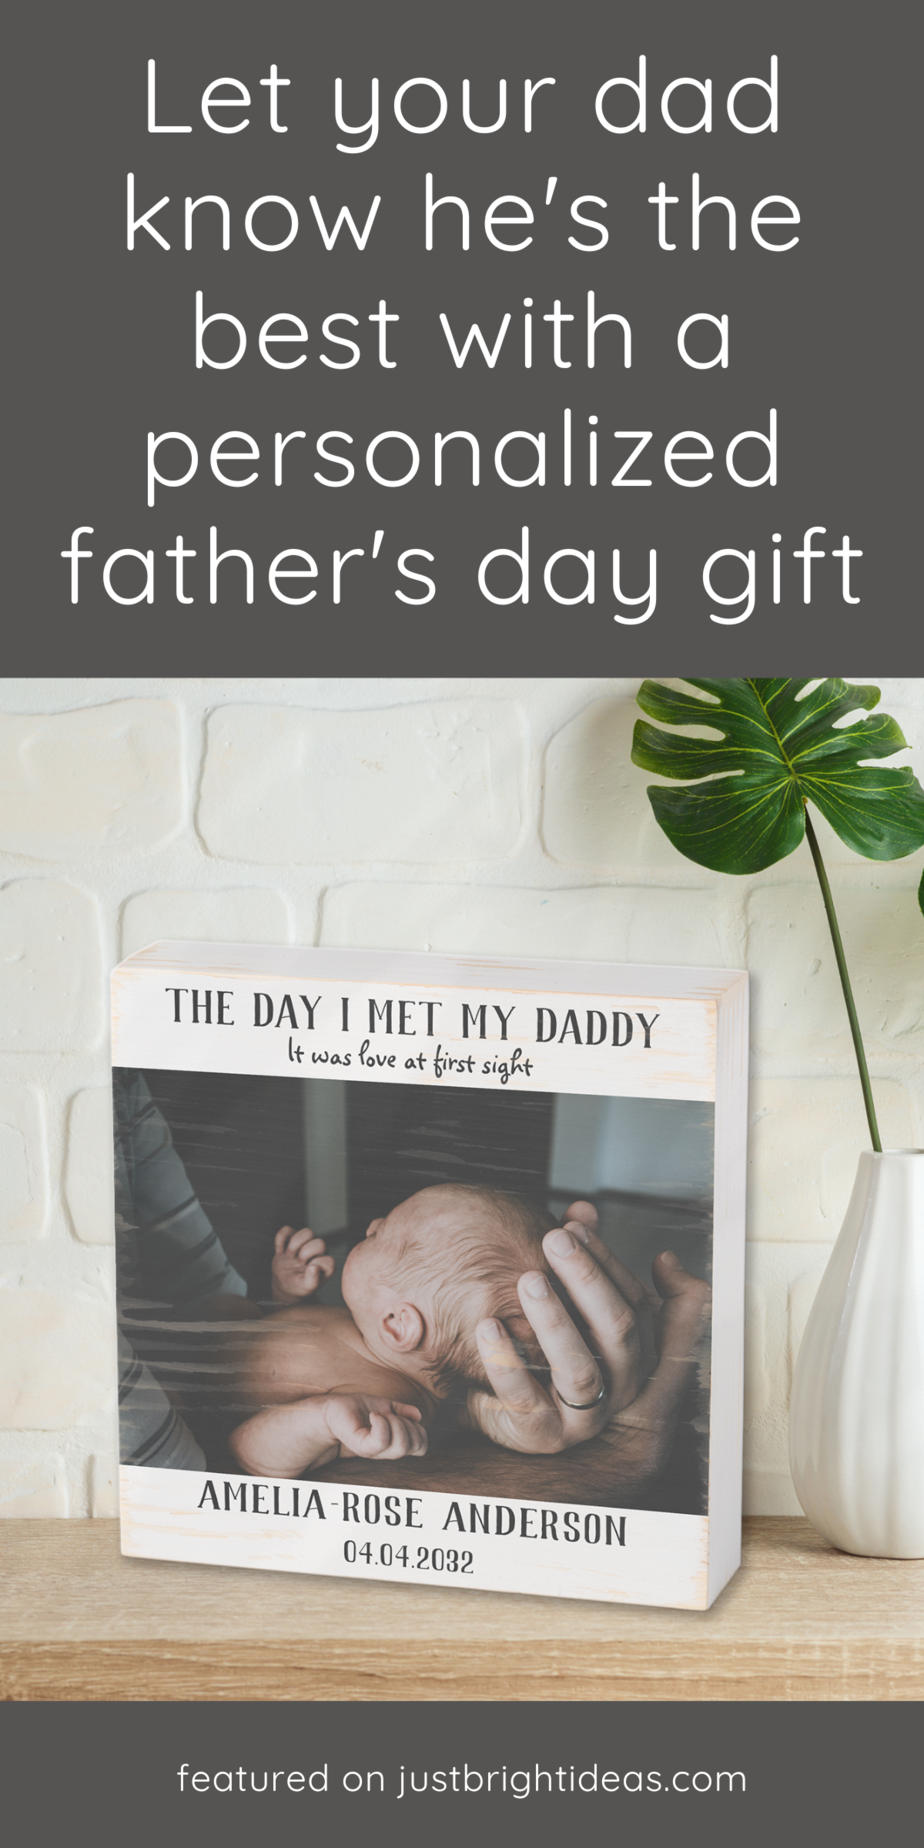 Celebrate your #1 Dad in style with unique, personalized gifts! 🎉 Show your appreciation this Father's Day with one-of-a-kind presents that he'll cherish forever. 💙 